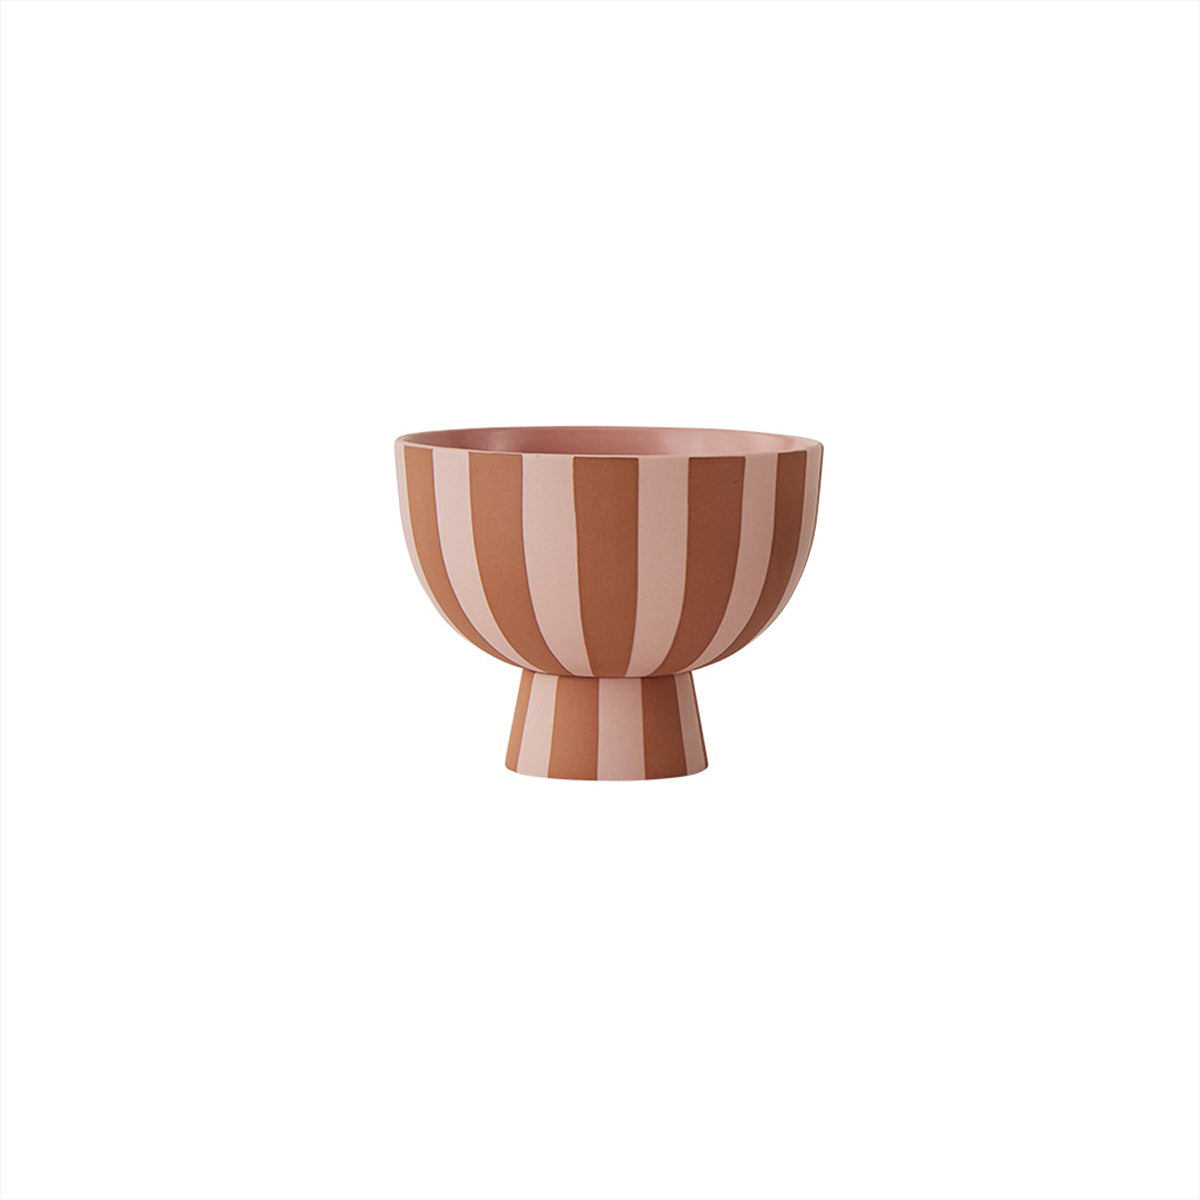 Load image into Gallery viewer, OYOY LIVING Toppu Mini Bowl Vase 307 Caramel / Rose
